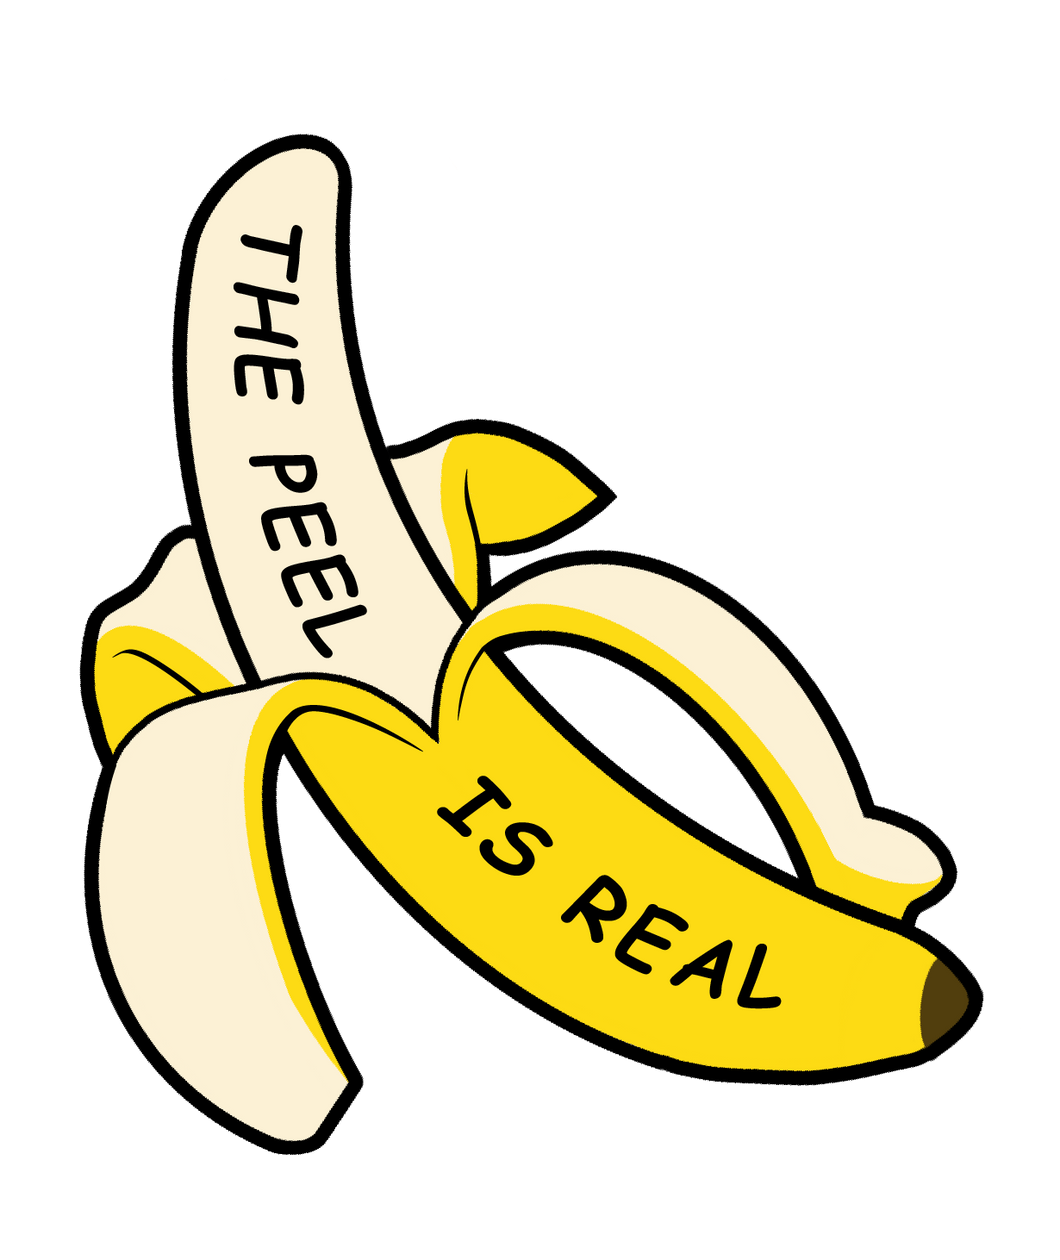 The Peel is Real Sticker